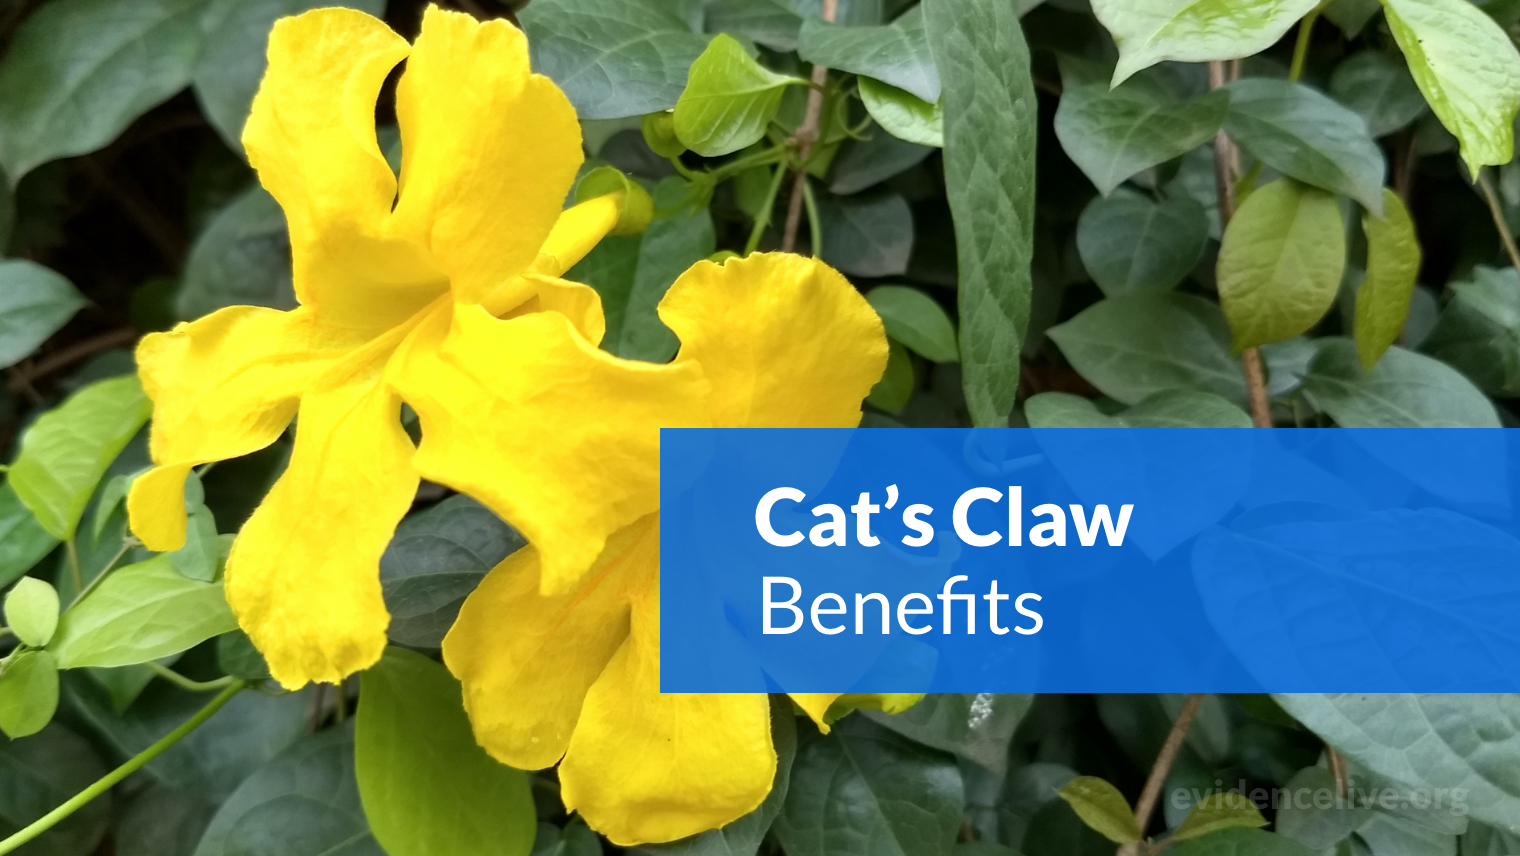 Cat’s Claw: Benefits, Uses, Dosage, and Side Effects